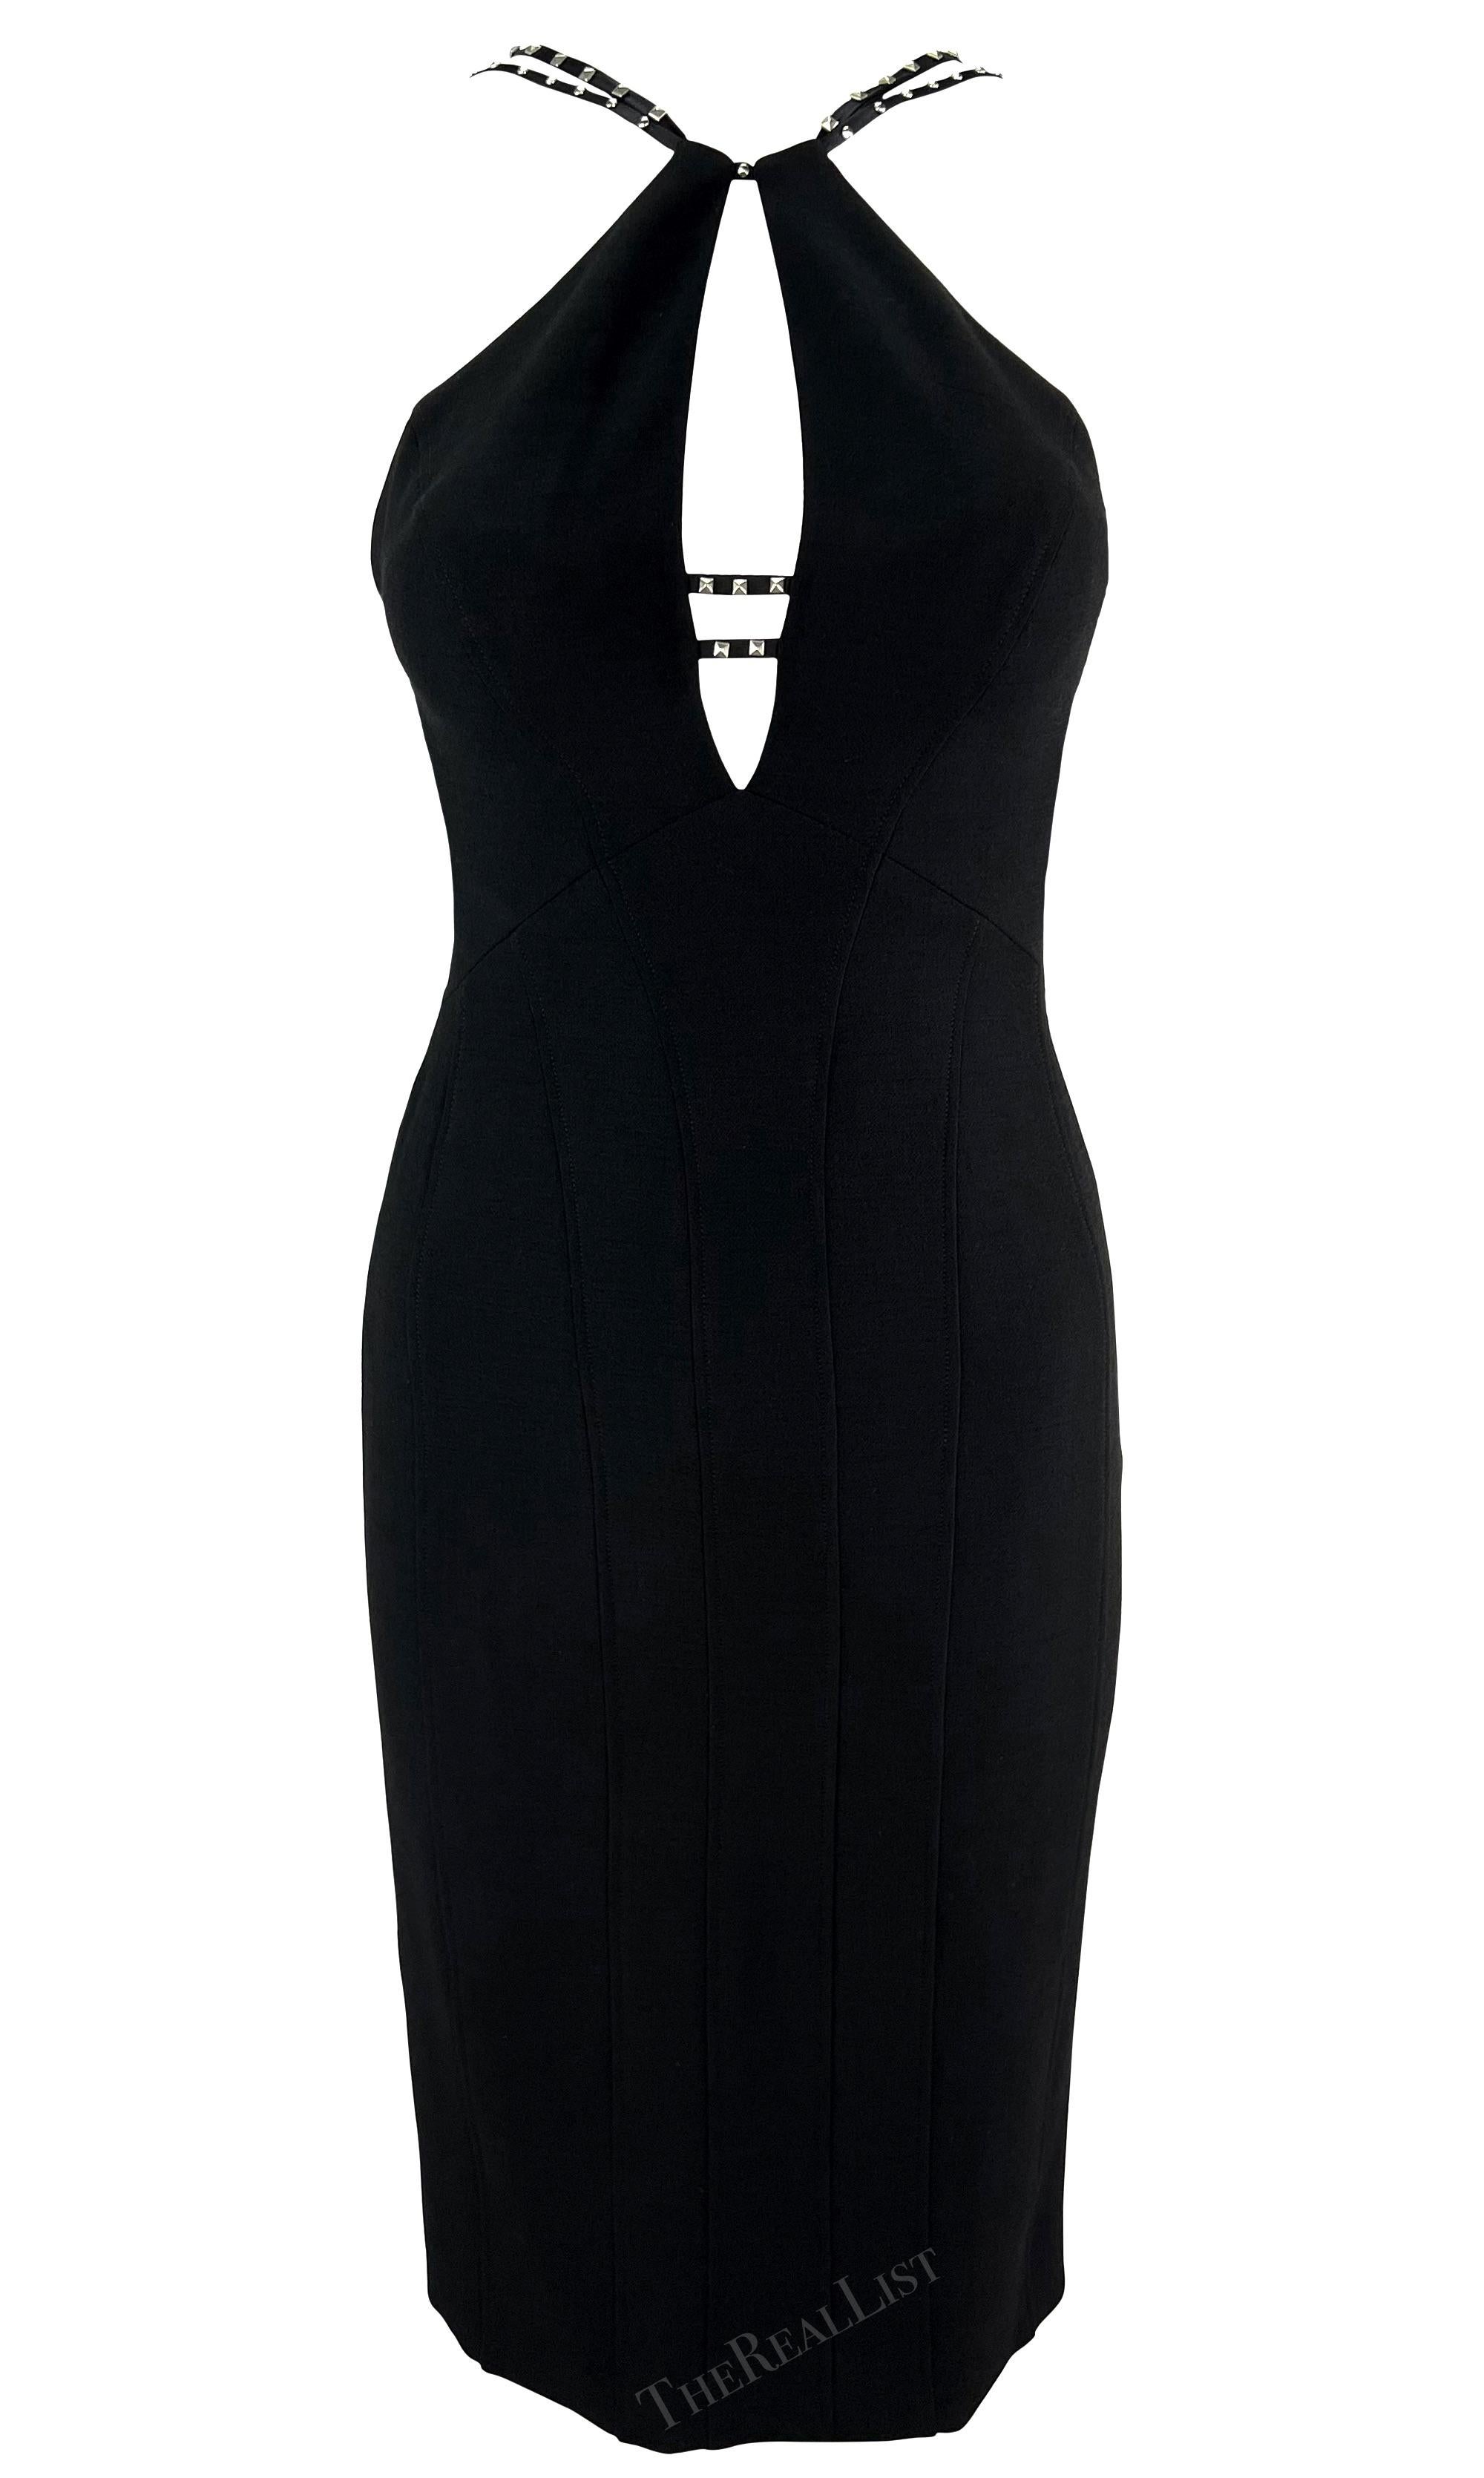 Women's F/W 2004 Versace by Donatella Black Studded Plunging Runway Mini Dress For Sale